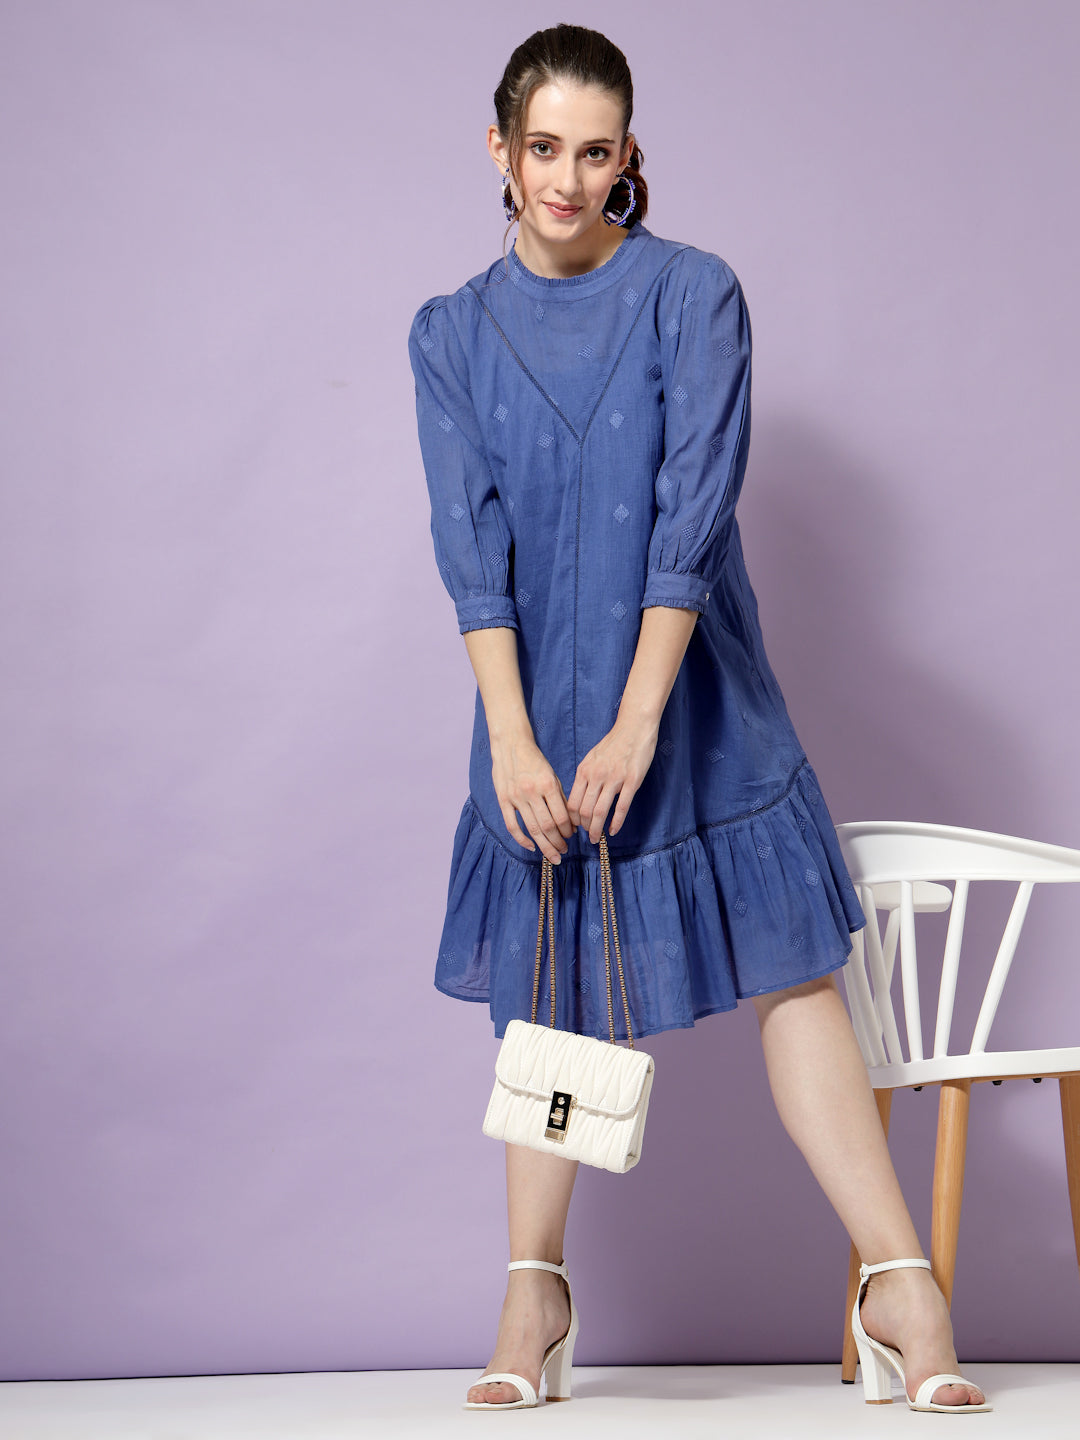 Terquois Stylish A-line Casual Dress Emblished with Lace and Has Ruffle Round Neck Dresses TERQUOIS S Blue 